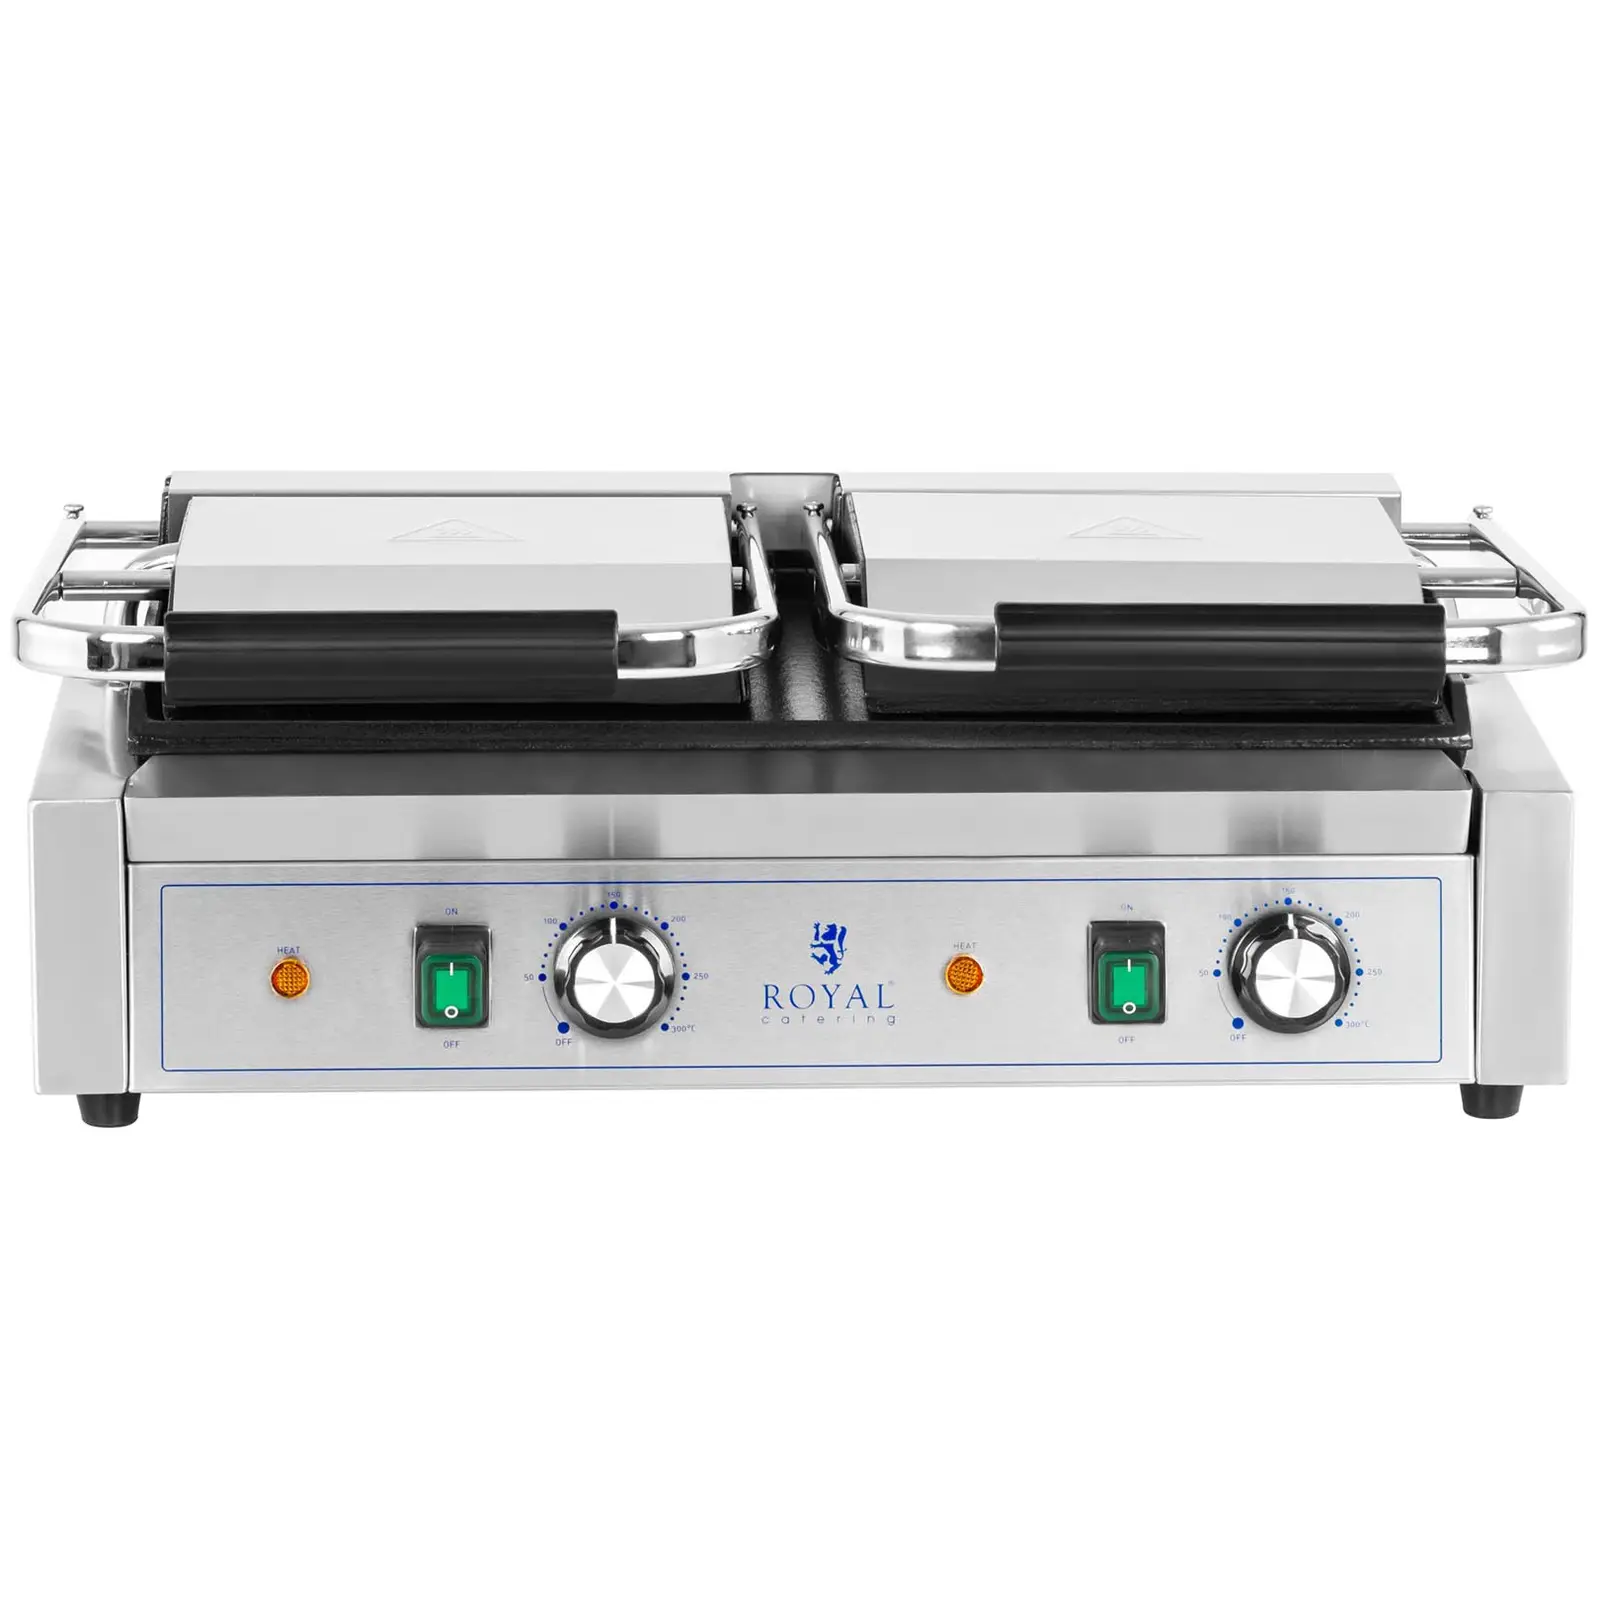 Machine à panini double - Lisse - Royal Catering - 3,600 W - 5